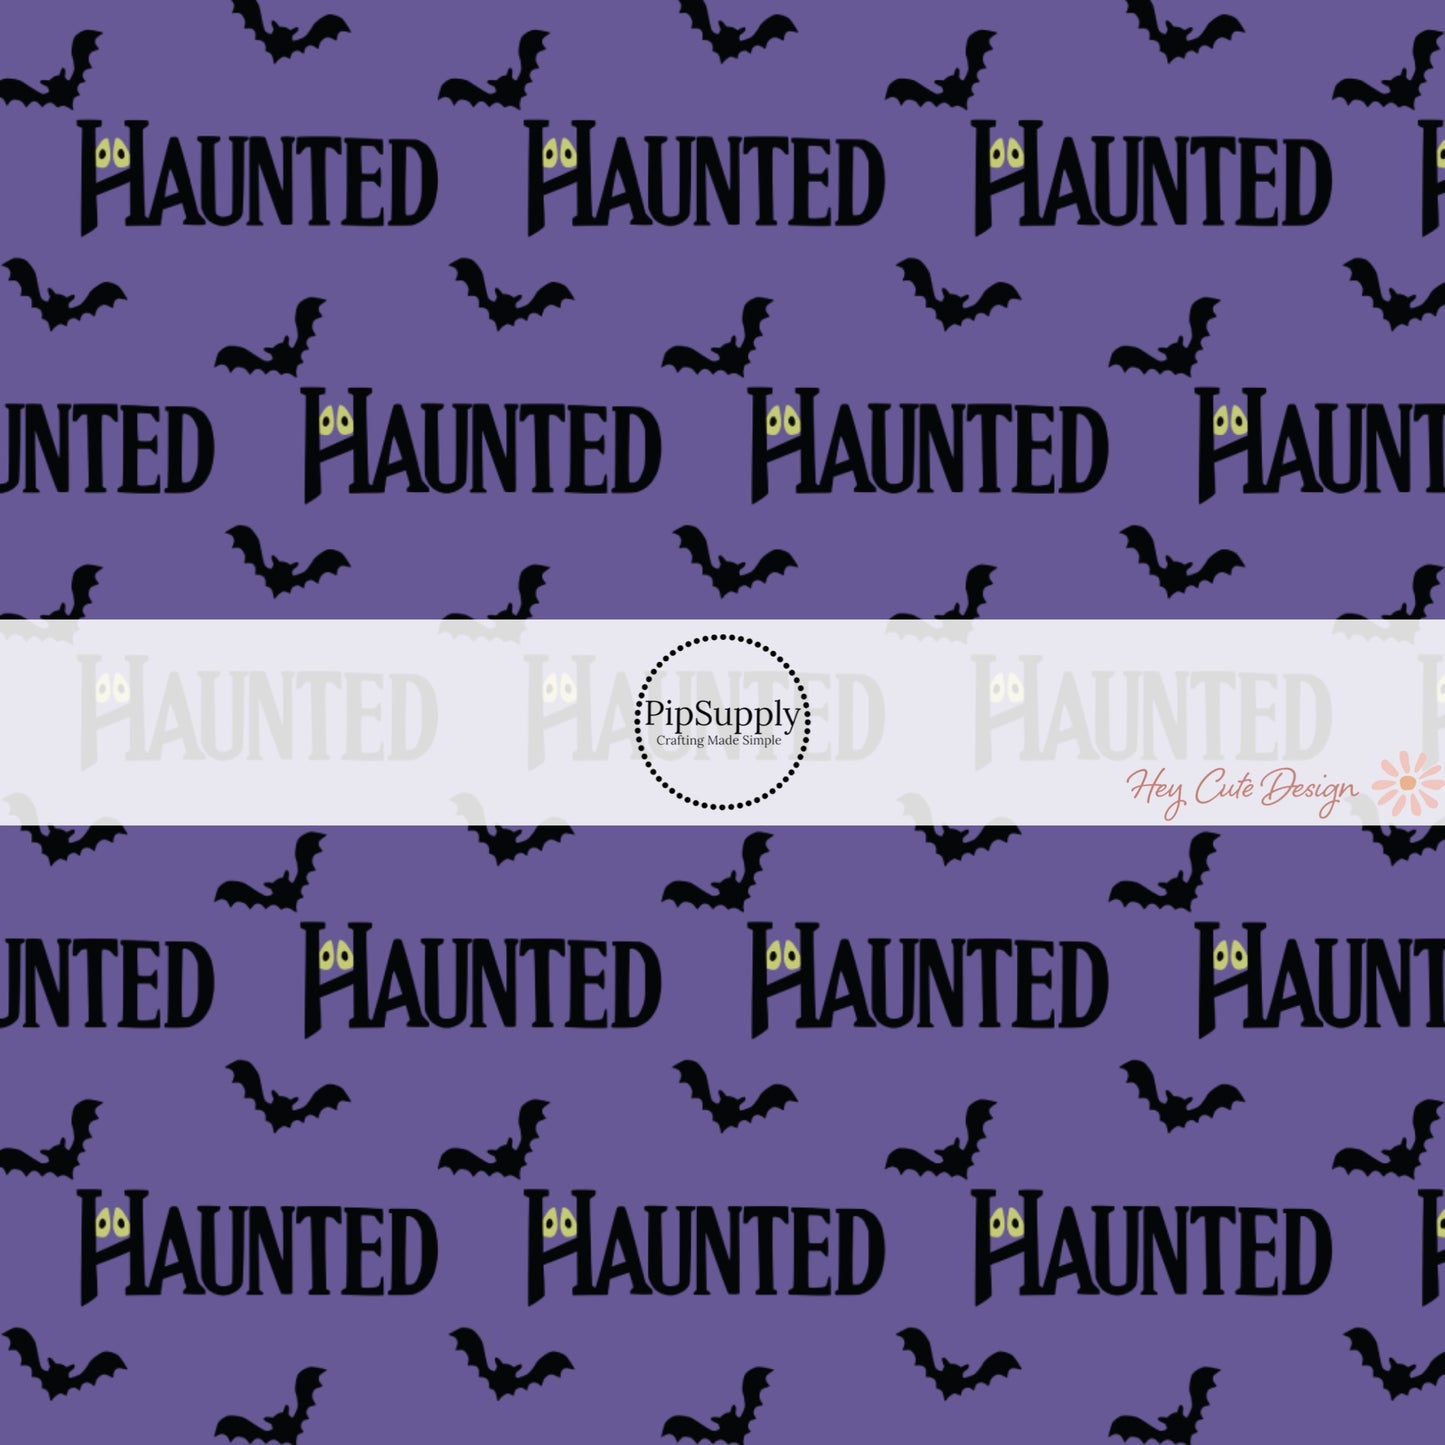 Flying bats and haunted saying with eyes on purple hair bow strips